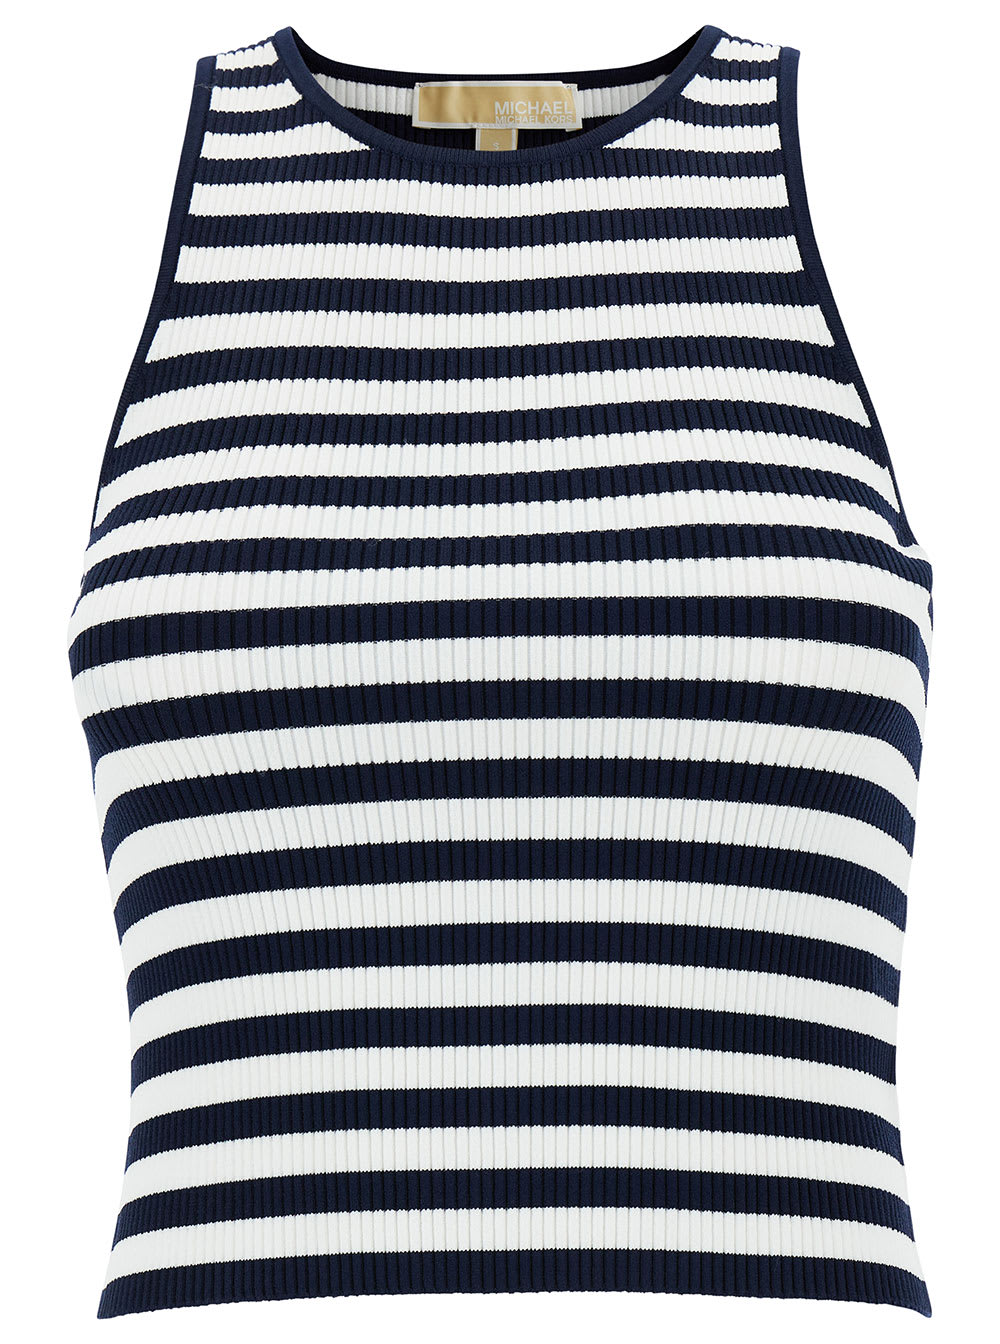 MICHAEL MICHAEL KORS BLUE AND WHITE TANK TOP WITH STRIPE MOTIF IN RECYCLED VISCOSE BLEND WOMAN